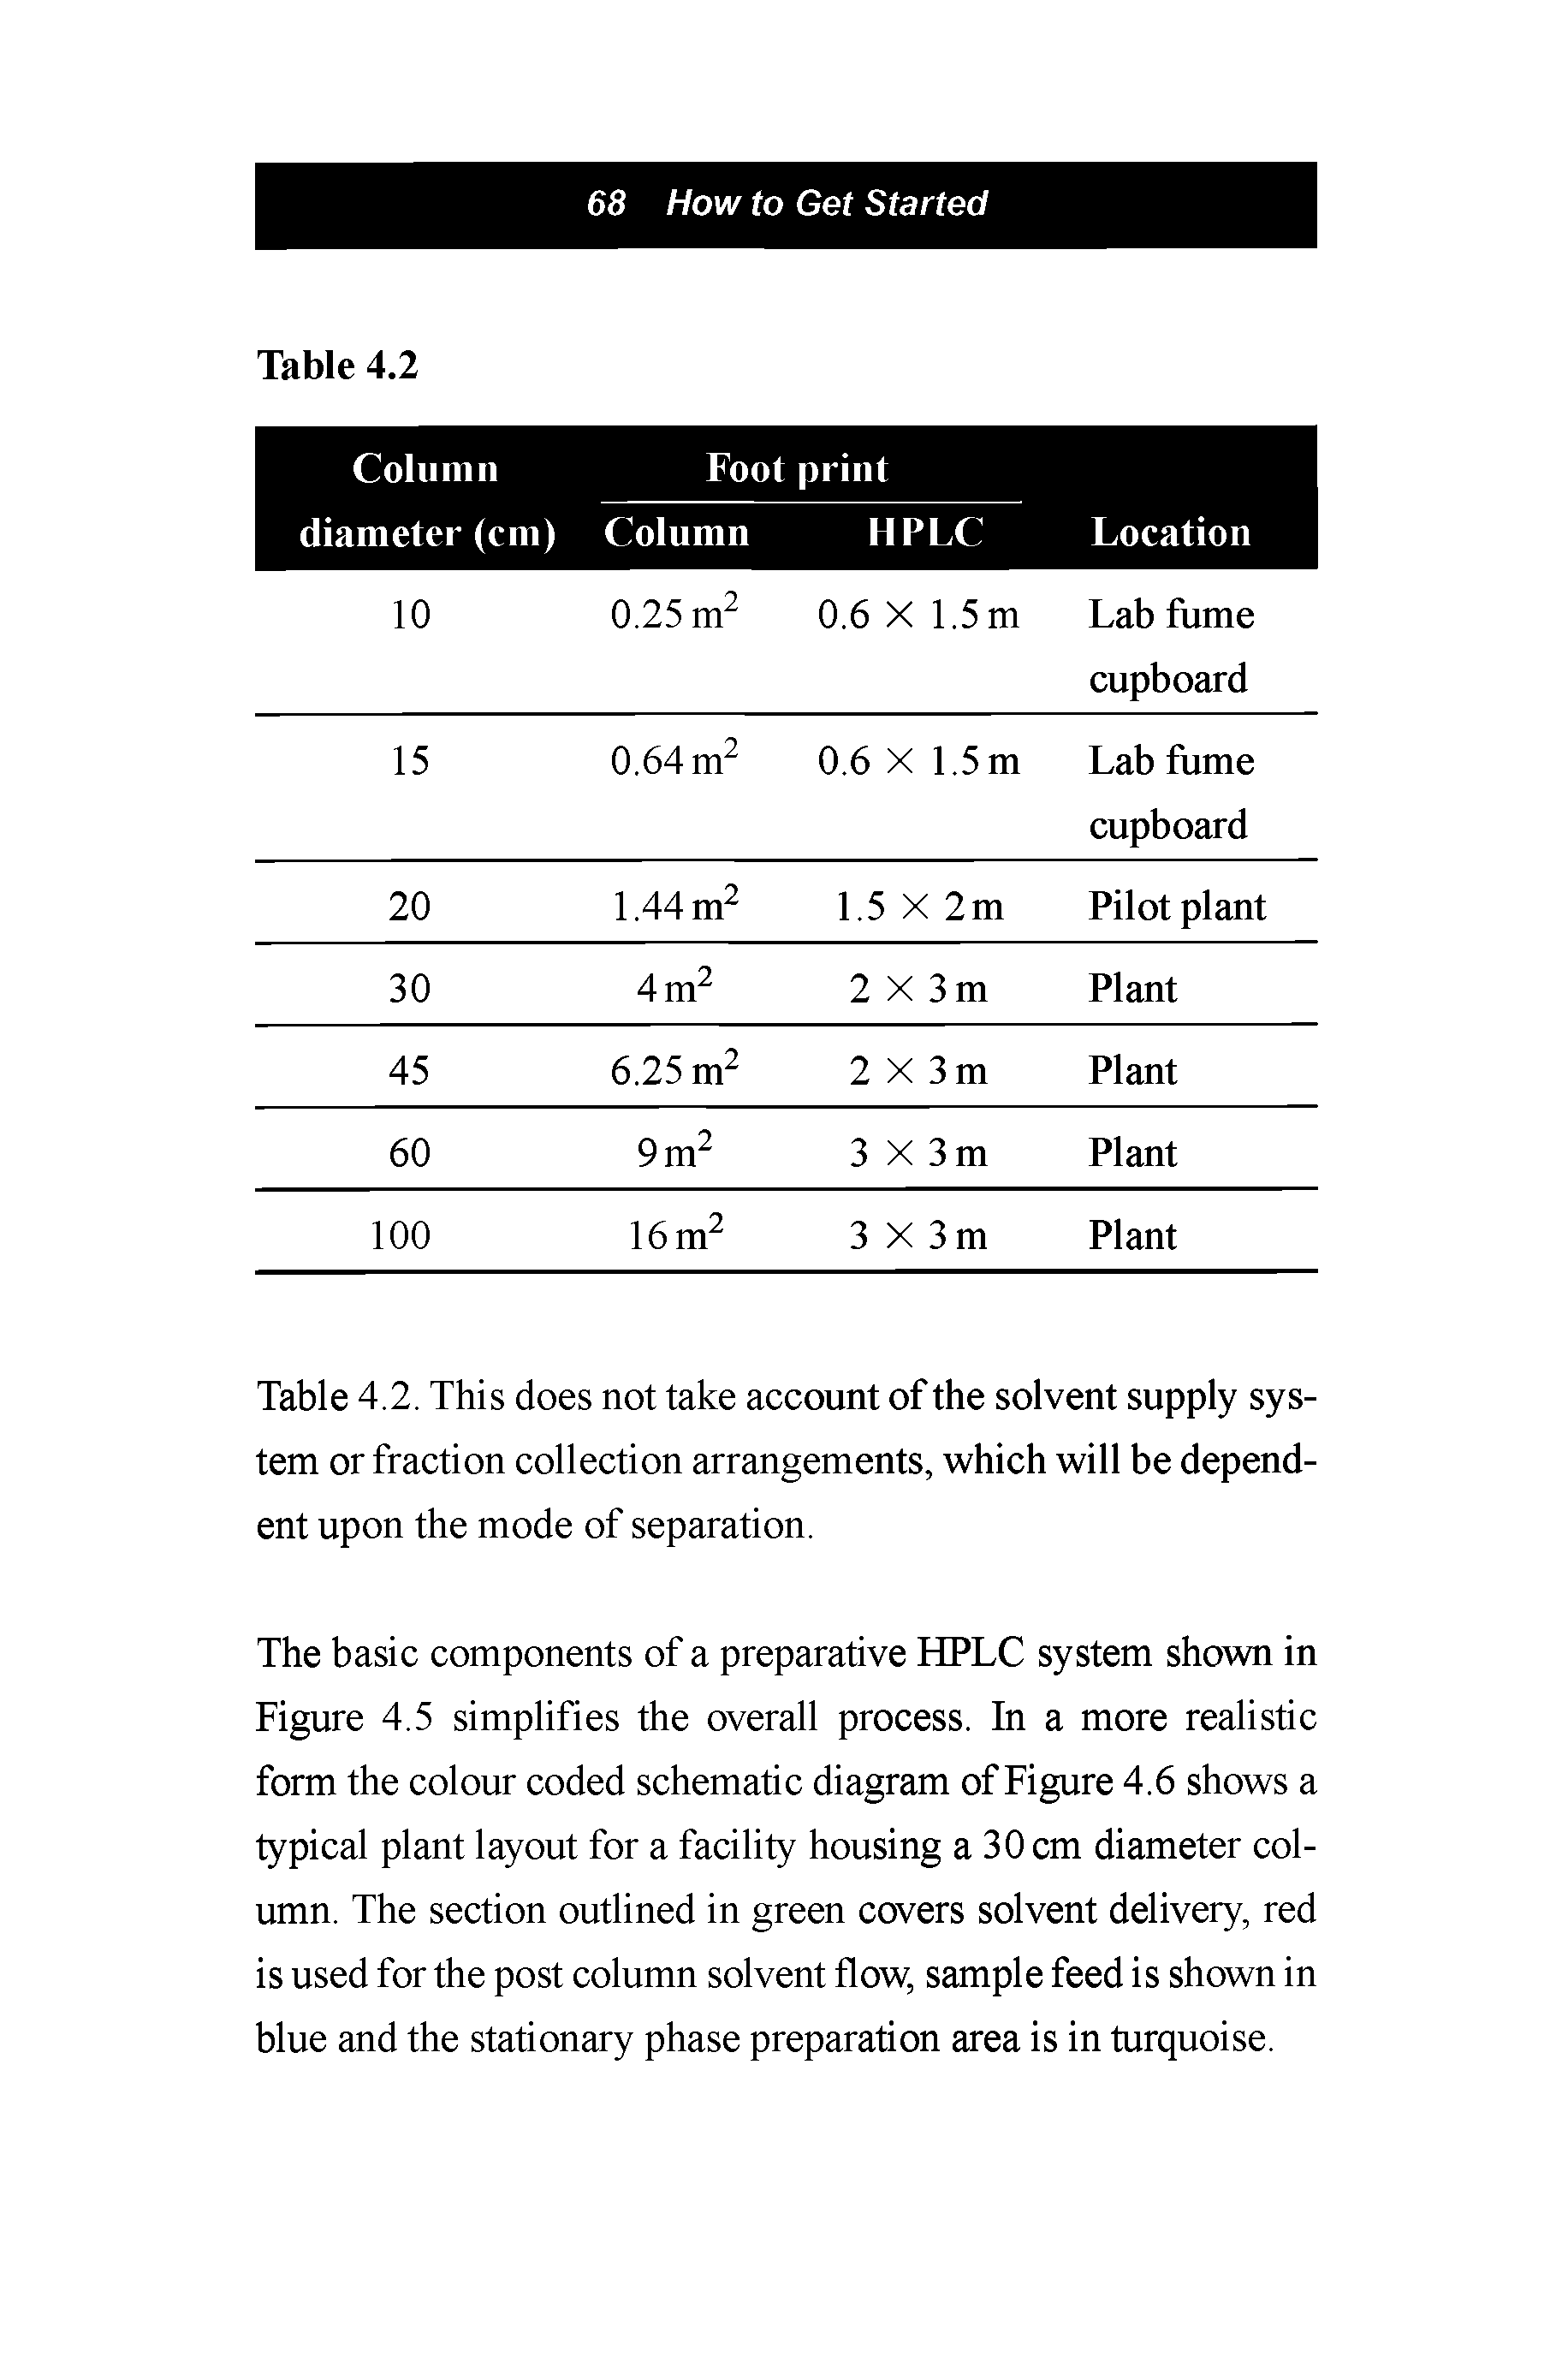 Table 4.2. This does not take account of the solvent supply system or fraction collection arrangements, which will be dependent upon the mode of separation.